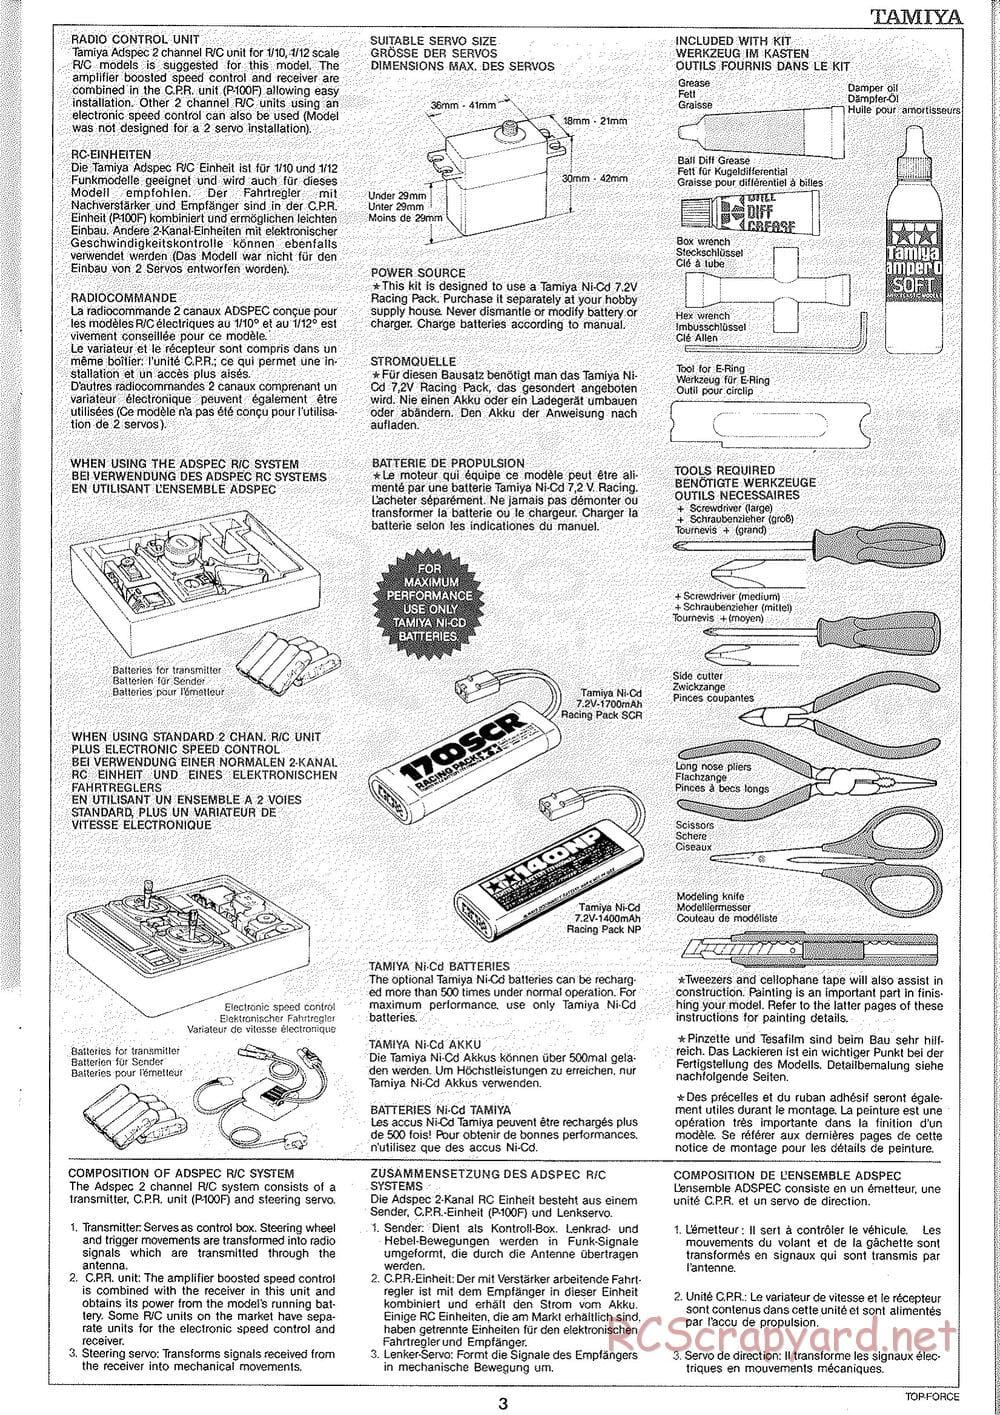 Tamiya - Top Force 2005 - DF-01 Chassis - Manual - Page 3